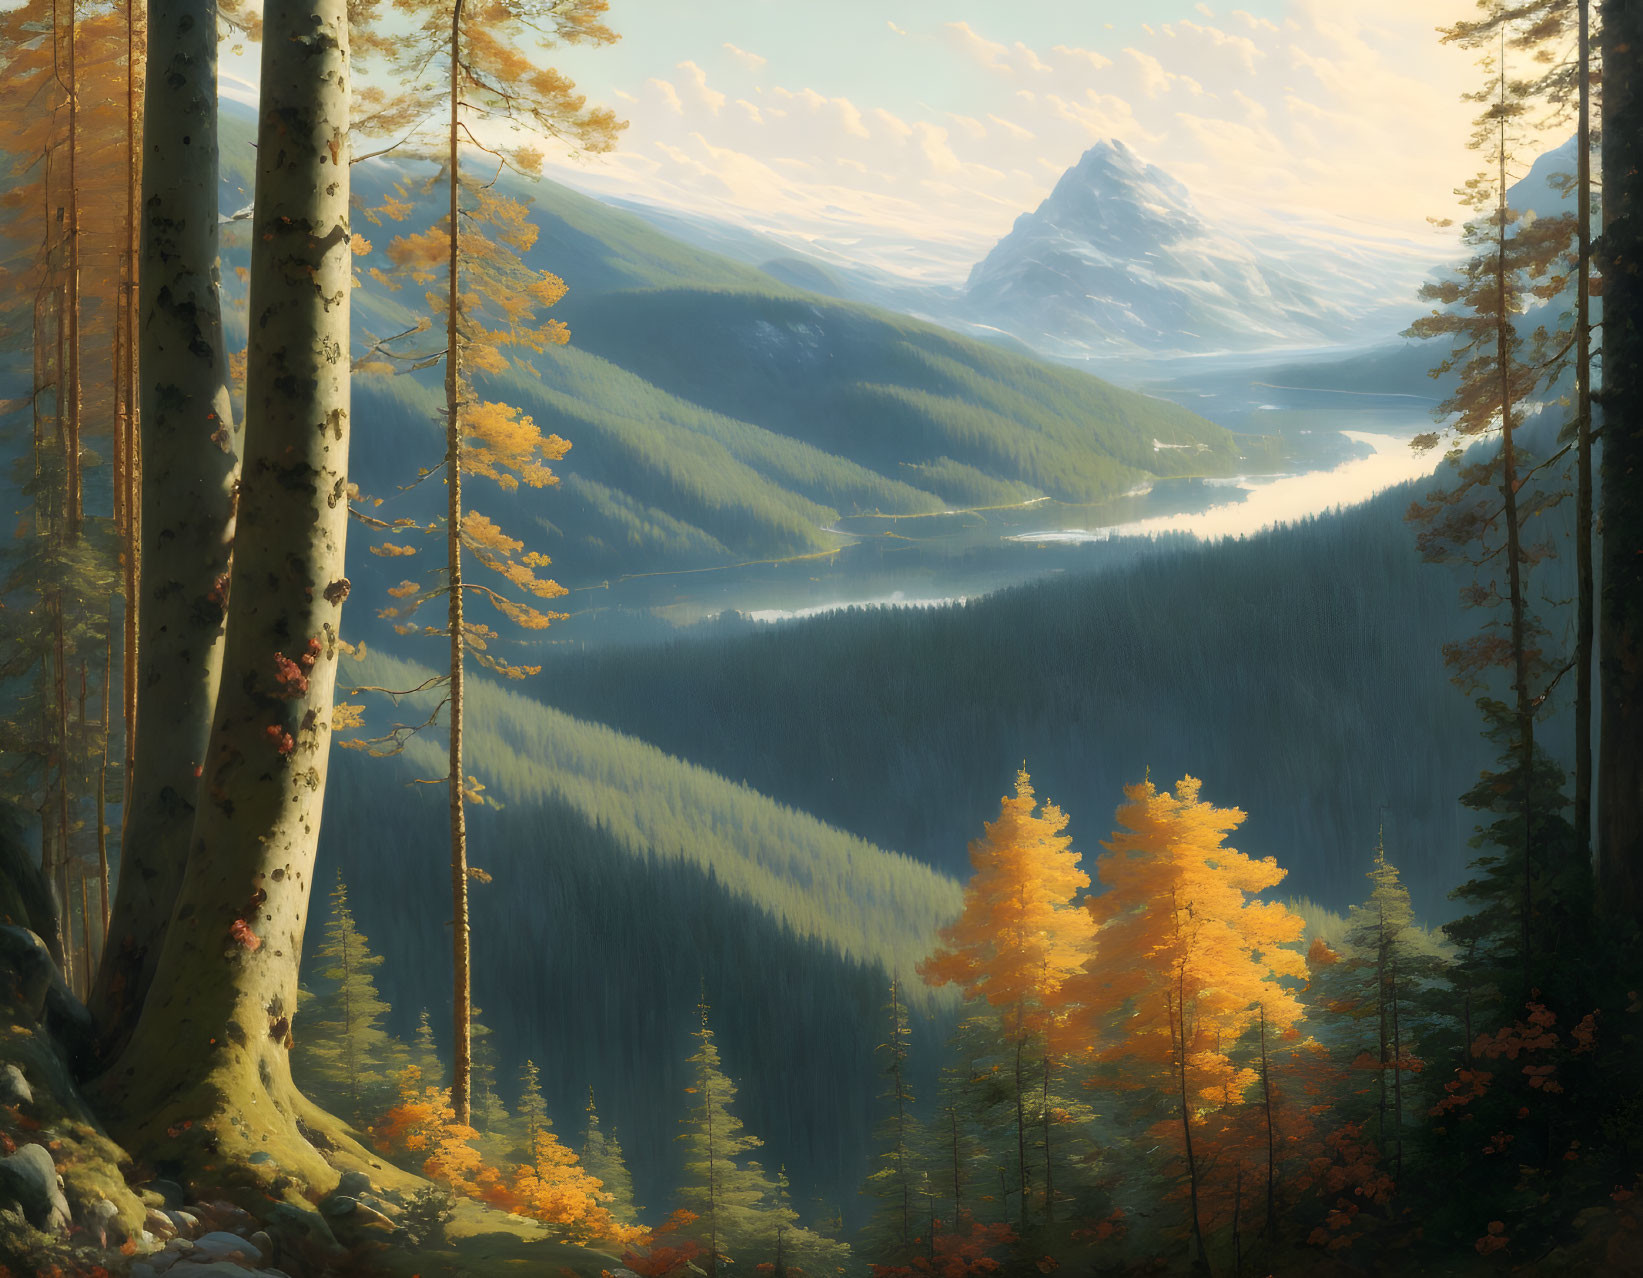 Sunlit autumn forest overlooking river valley and mountain